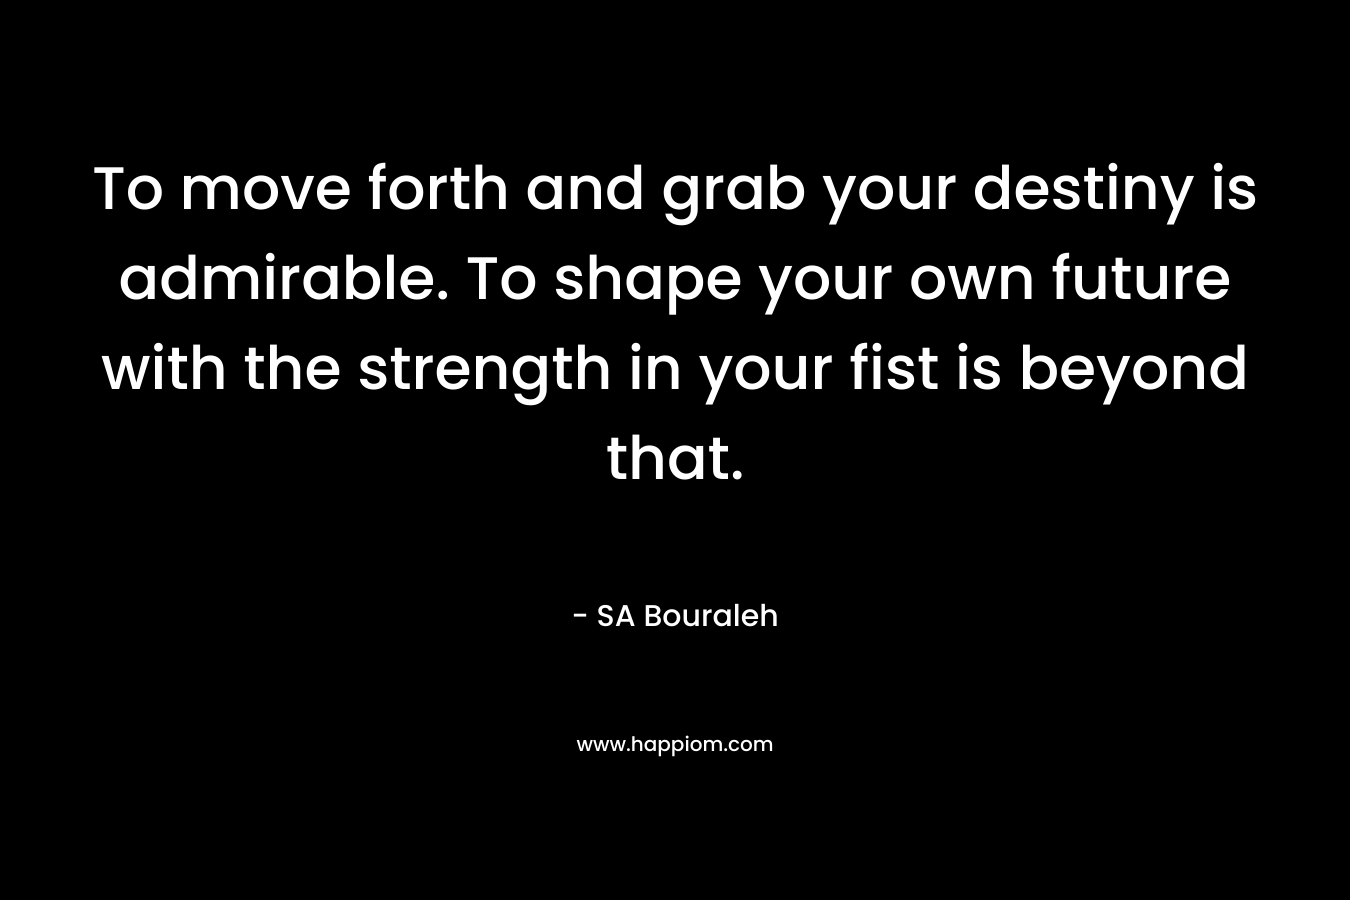 To move forth and grab your destiny is admirable. To shape your own future with the strength in your fist is beyond that. – SA Bouraleh